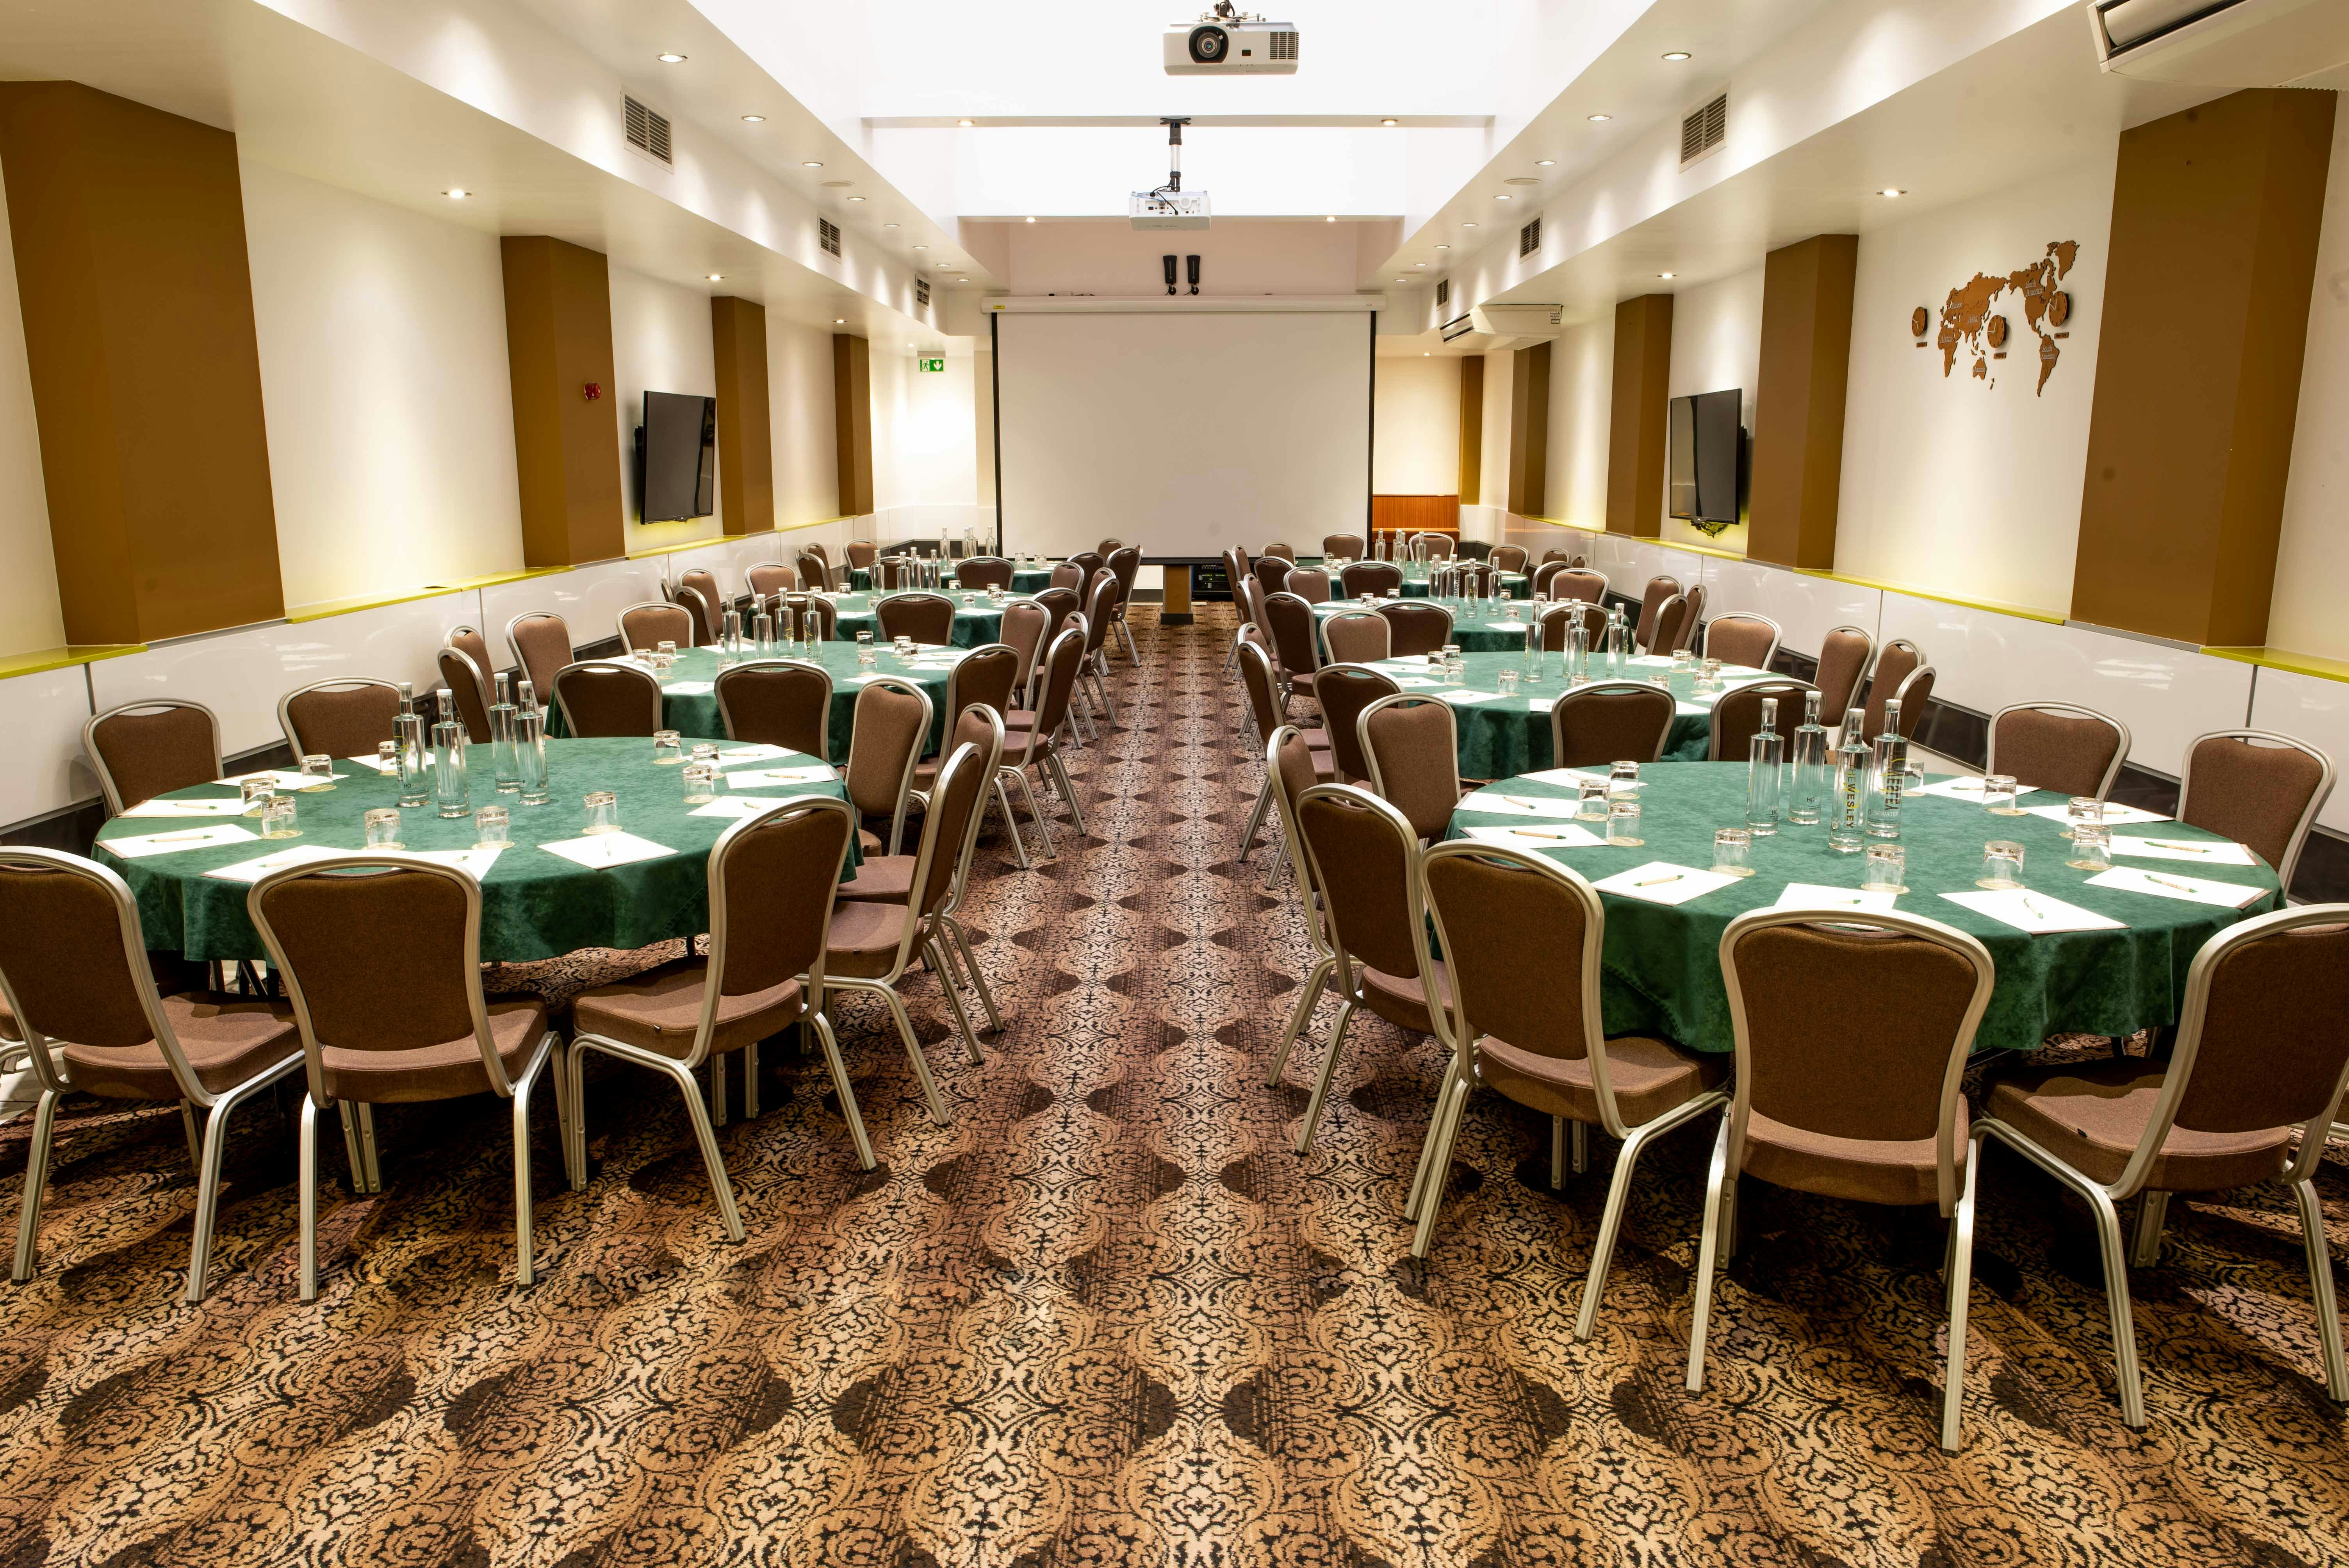 The Wesley Euston Hotel & Conference Venue  - Porter Hall image 2